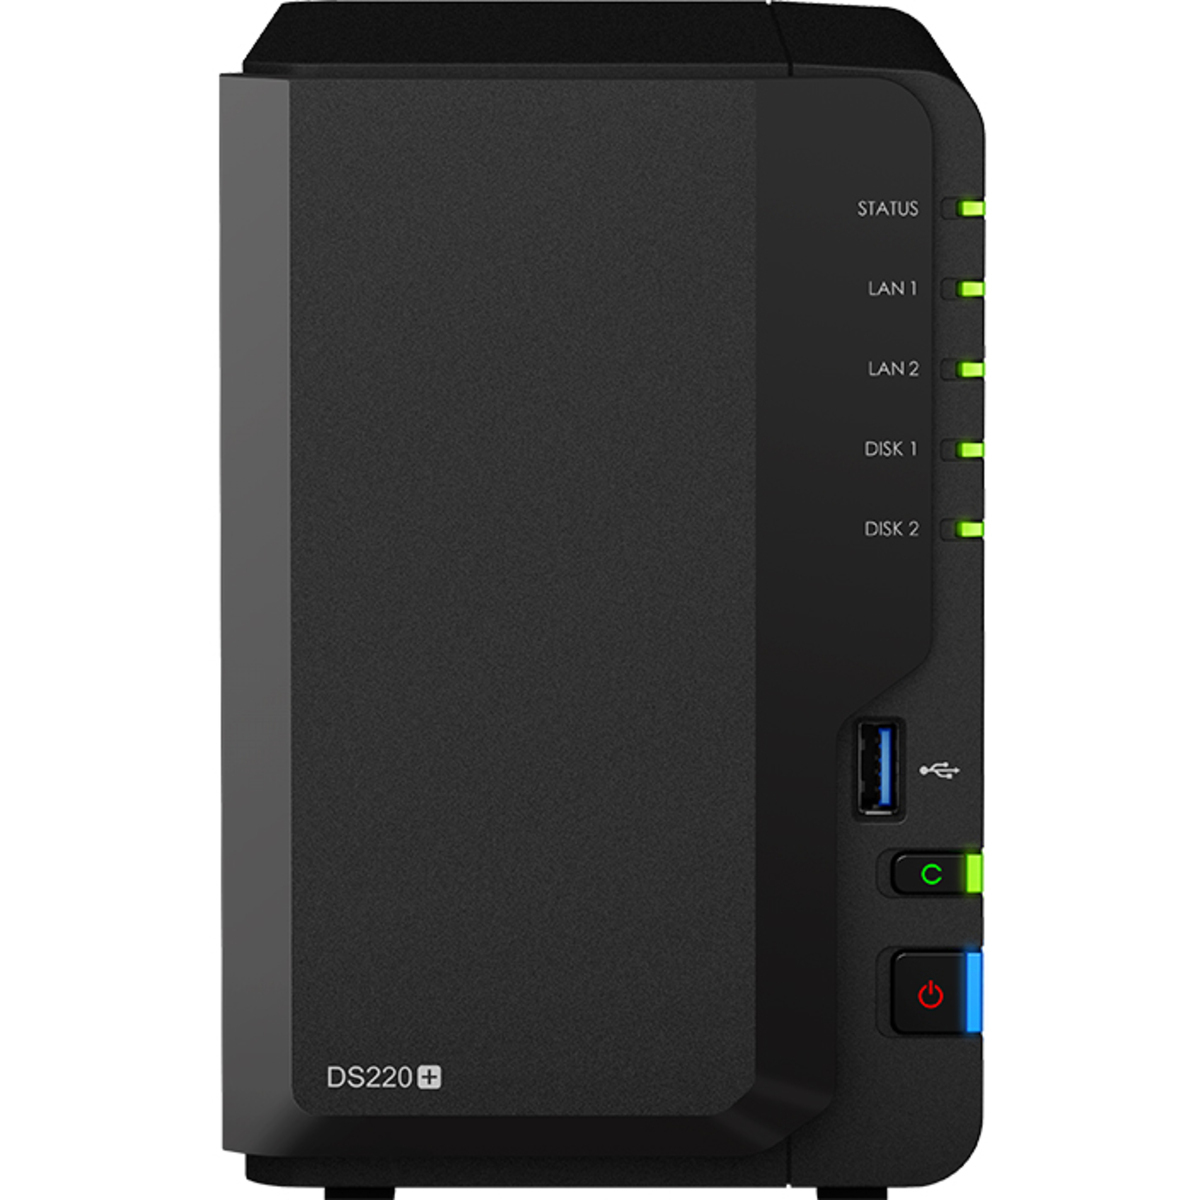 buy $876 Synology DiskStation DS220+ 16tb Desktop NAS - Network Attached Storage Device 2x8000gb Toshiba Enterprise Capacity MG08ADA800E 3.5 7200rpm SATA 6Gb/s HDD ENTERPRISE Class Drives Installed - Burn-In Tested - ON SALE - FREE RAM UPGRADE - nas headquarters buy network attached storage server device das new raid-5 free shipping usa christmas new year holiday sale DiskStation DS220+